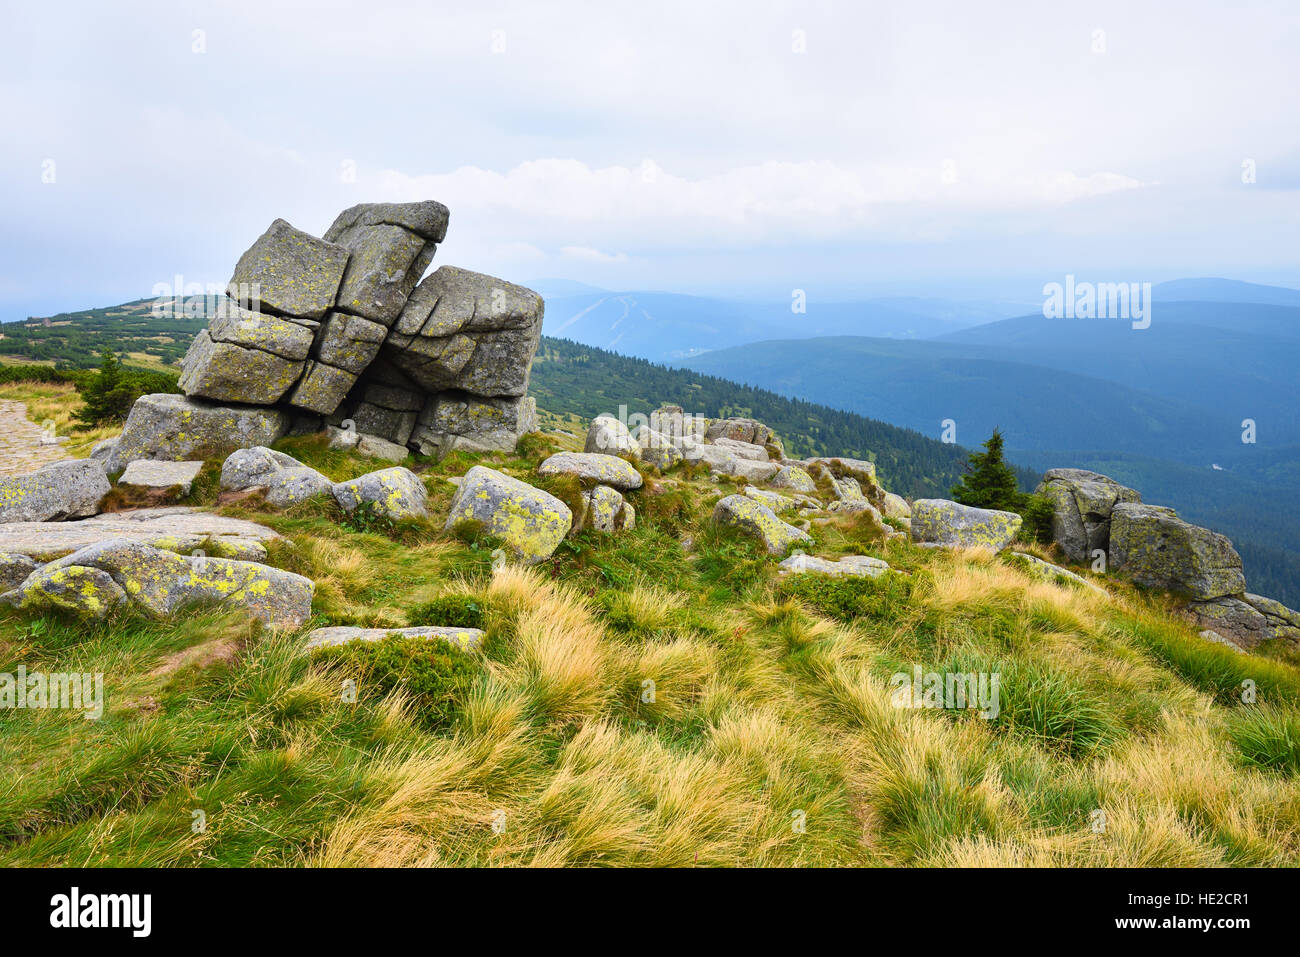 Eroded stones on a mountain peak in the mountains of Krkonose, Czech Republic Stock Photo